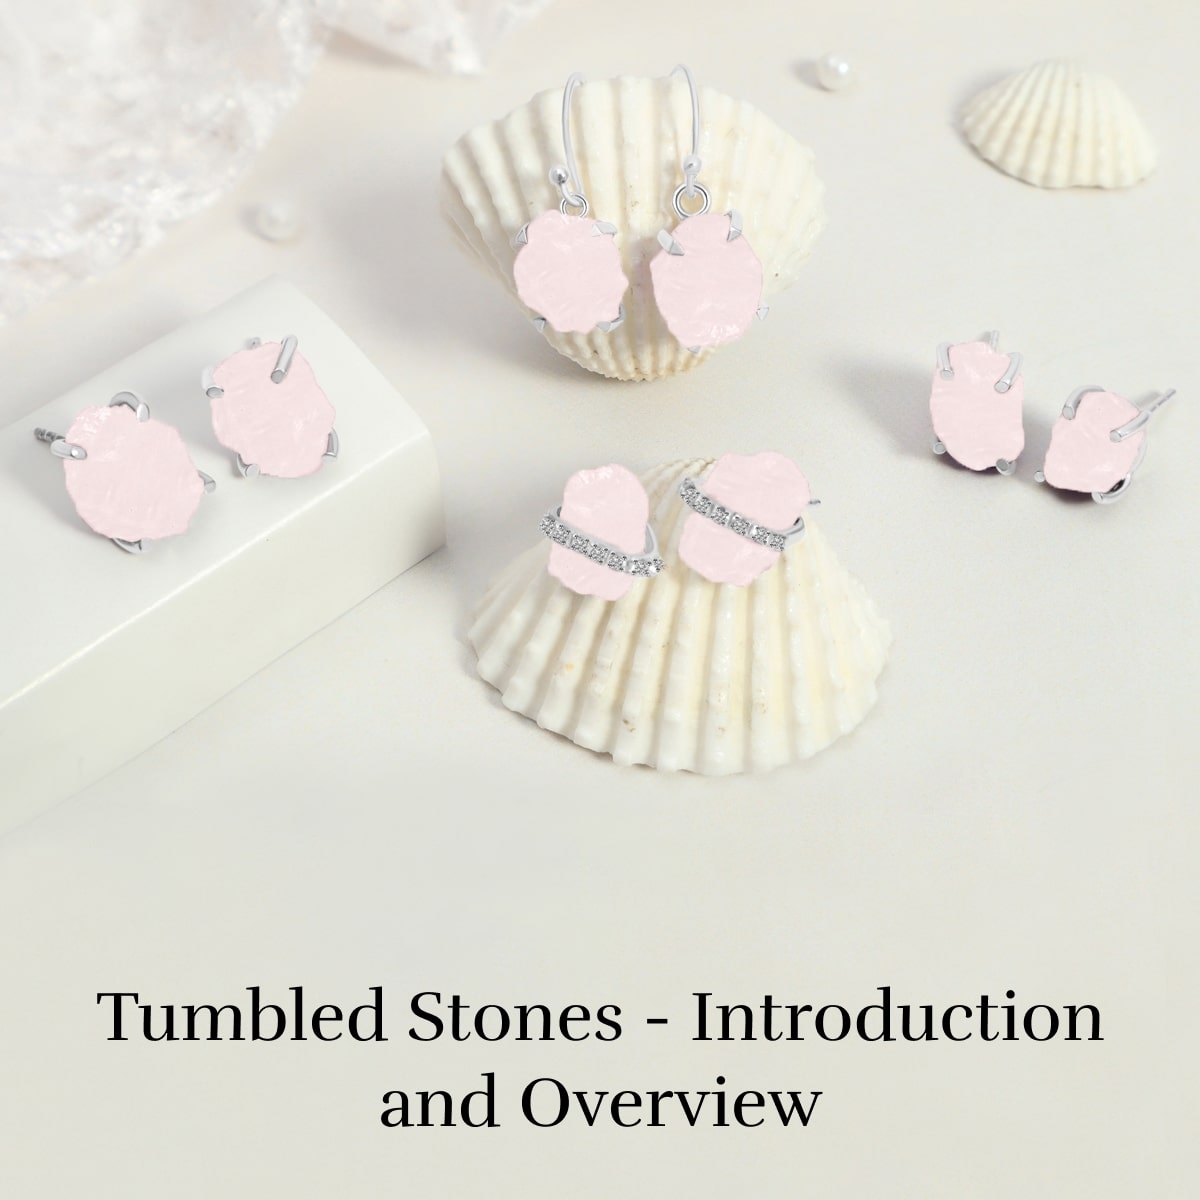 What are Tumbled Stones